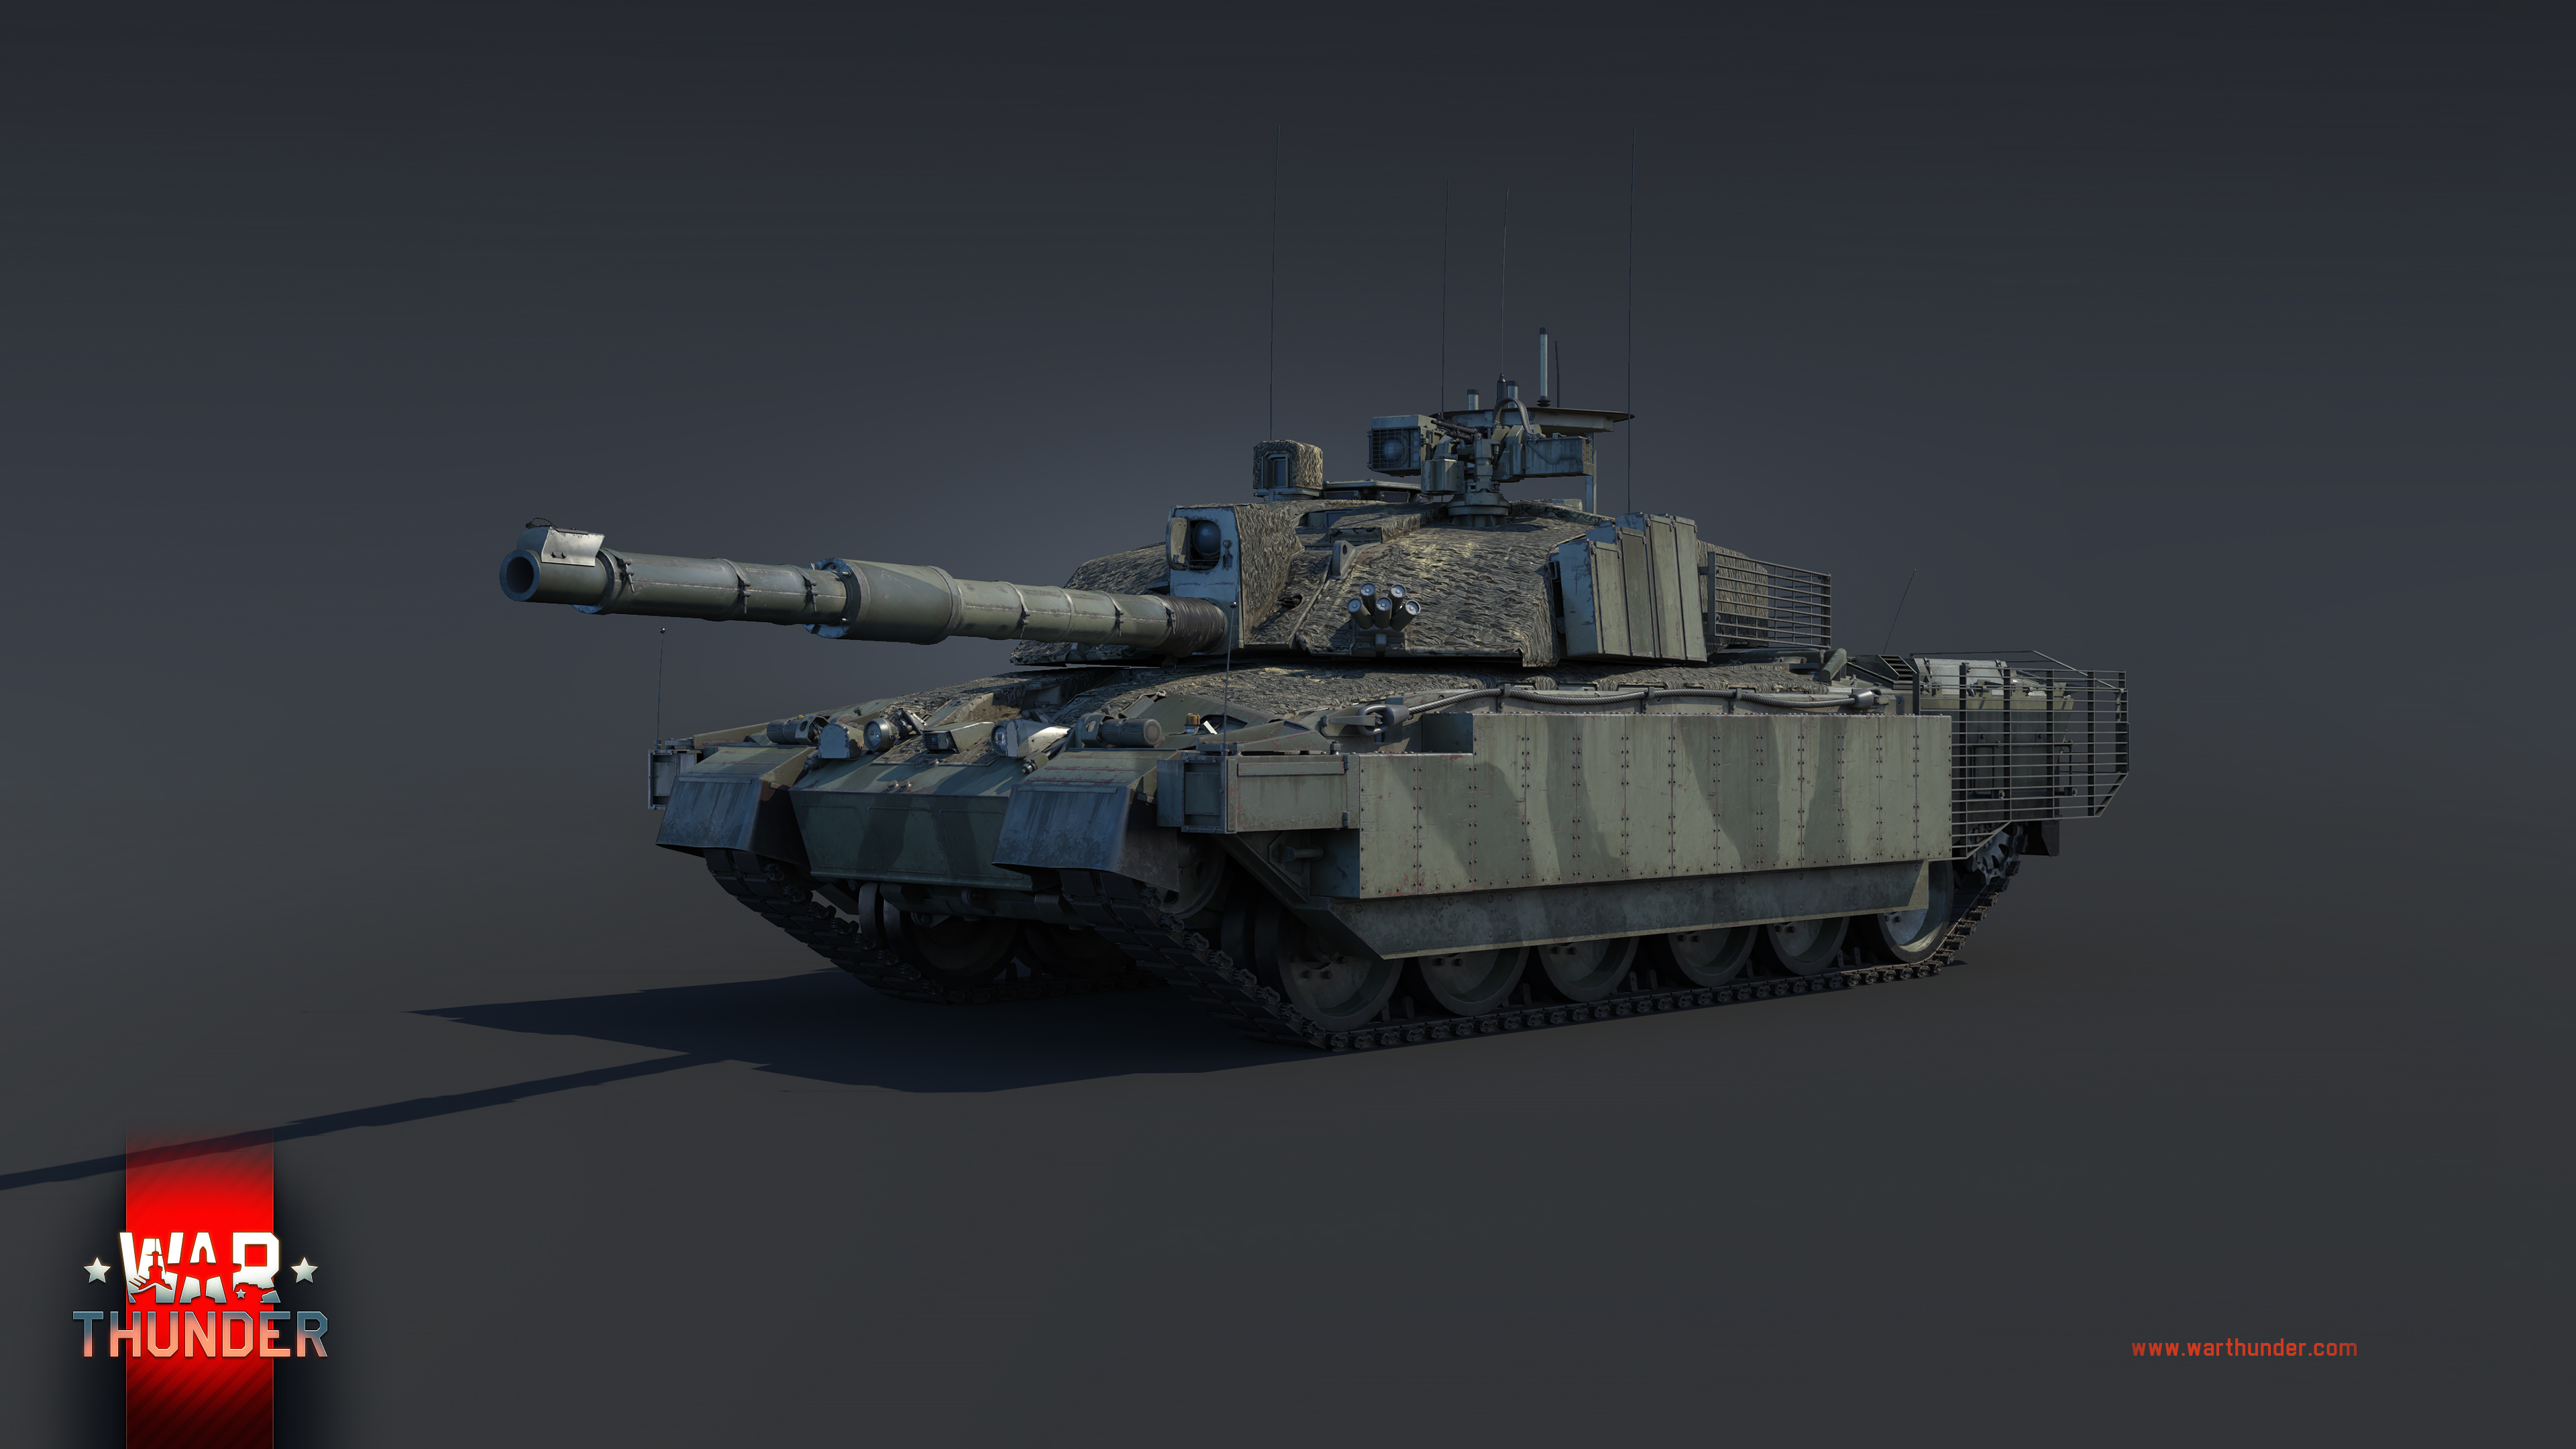 Development Challenger 2 TES: a new perspective